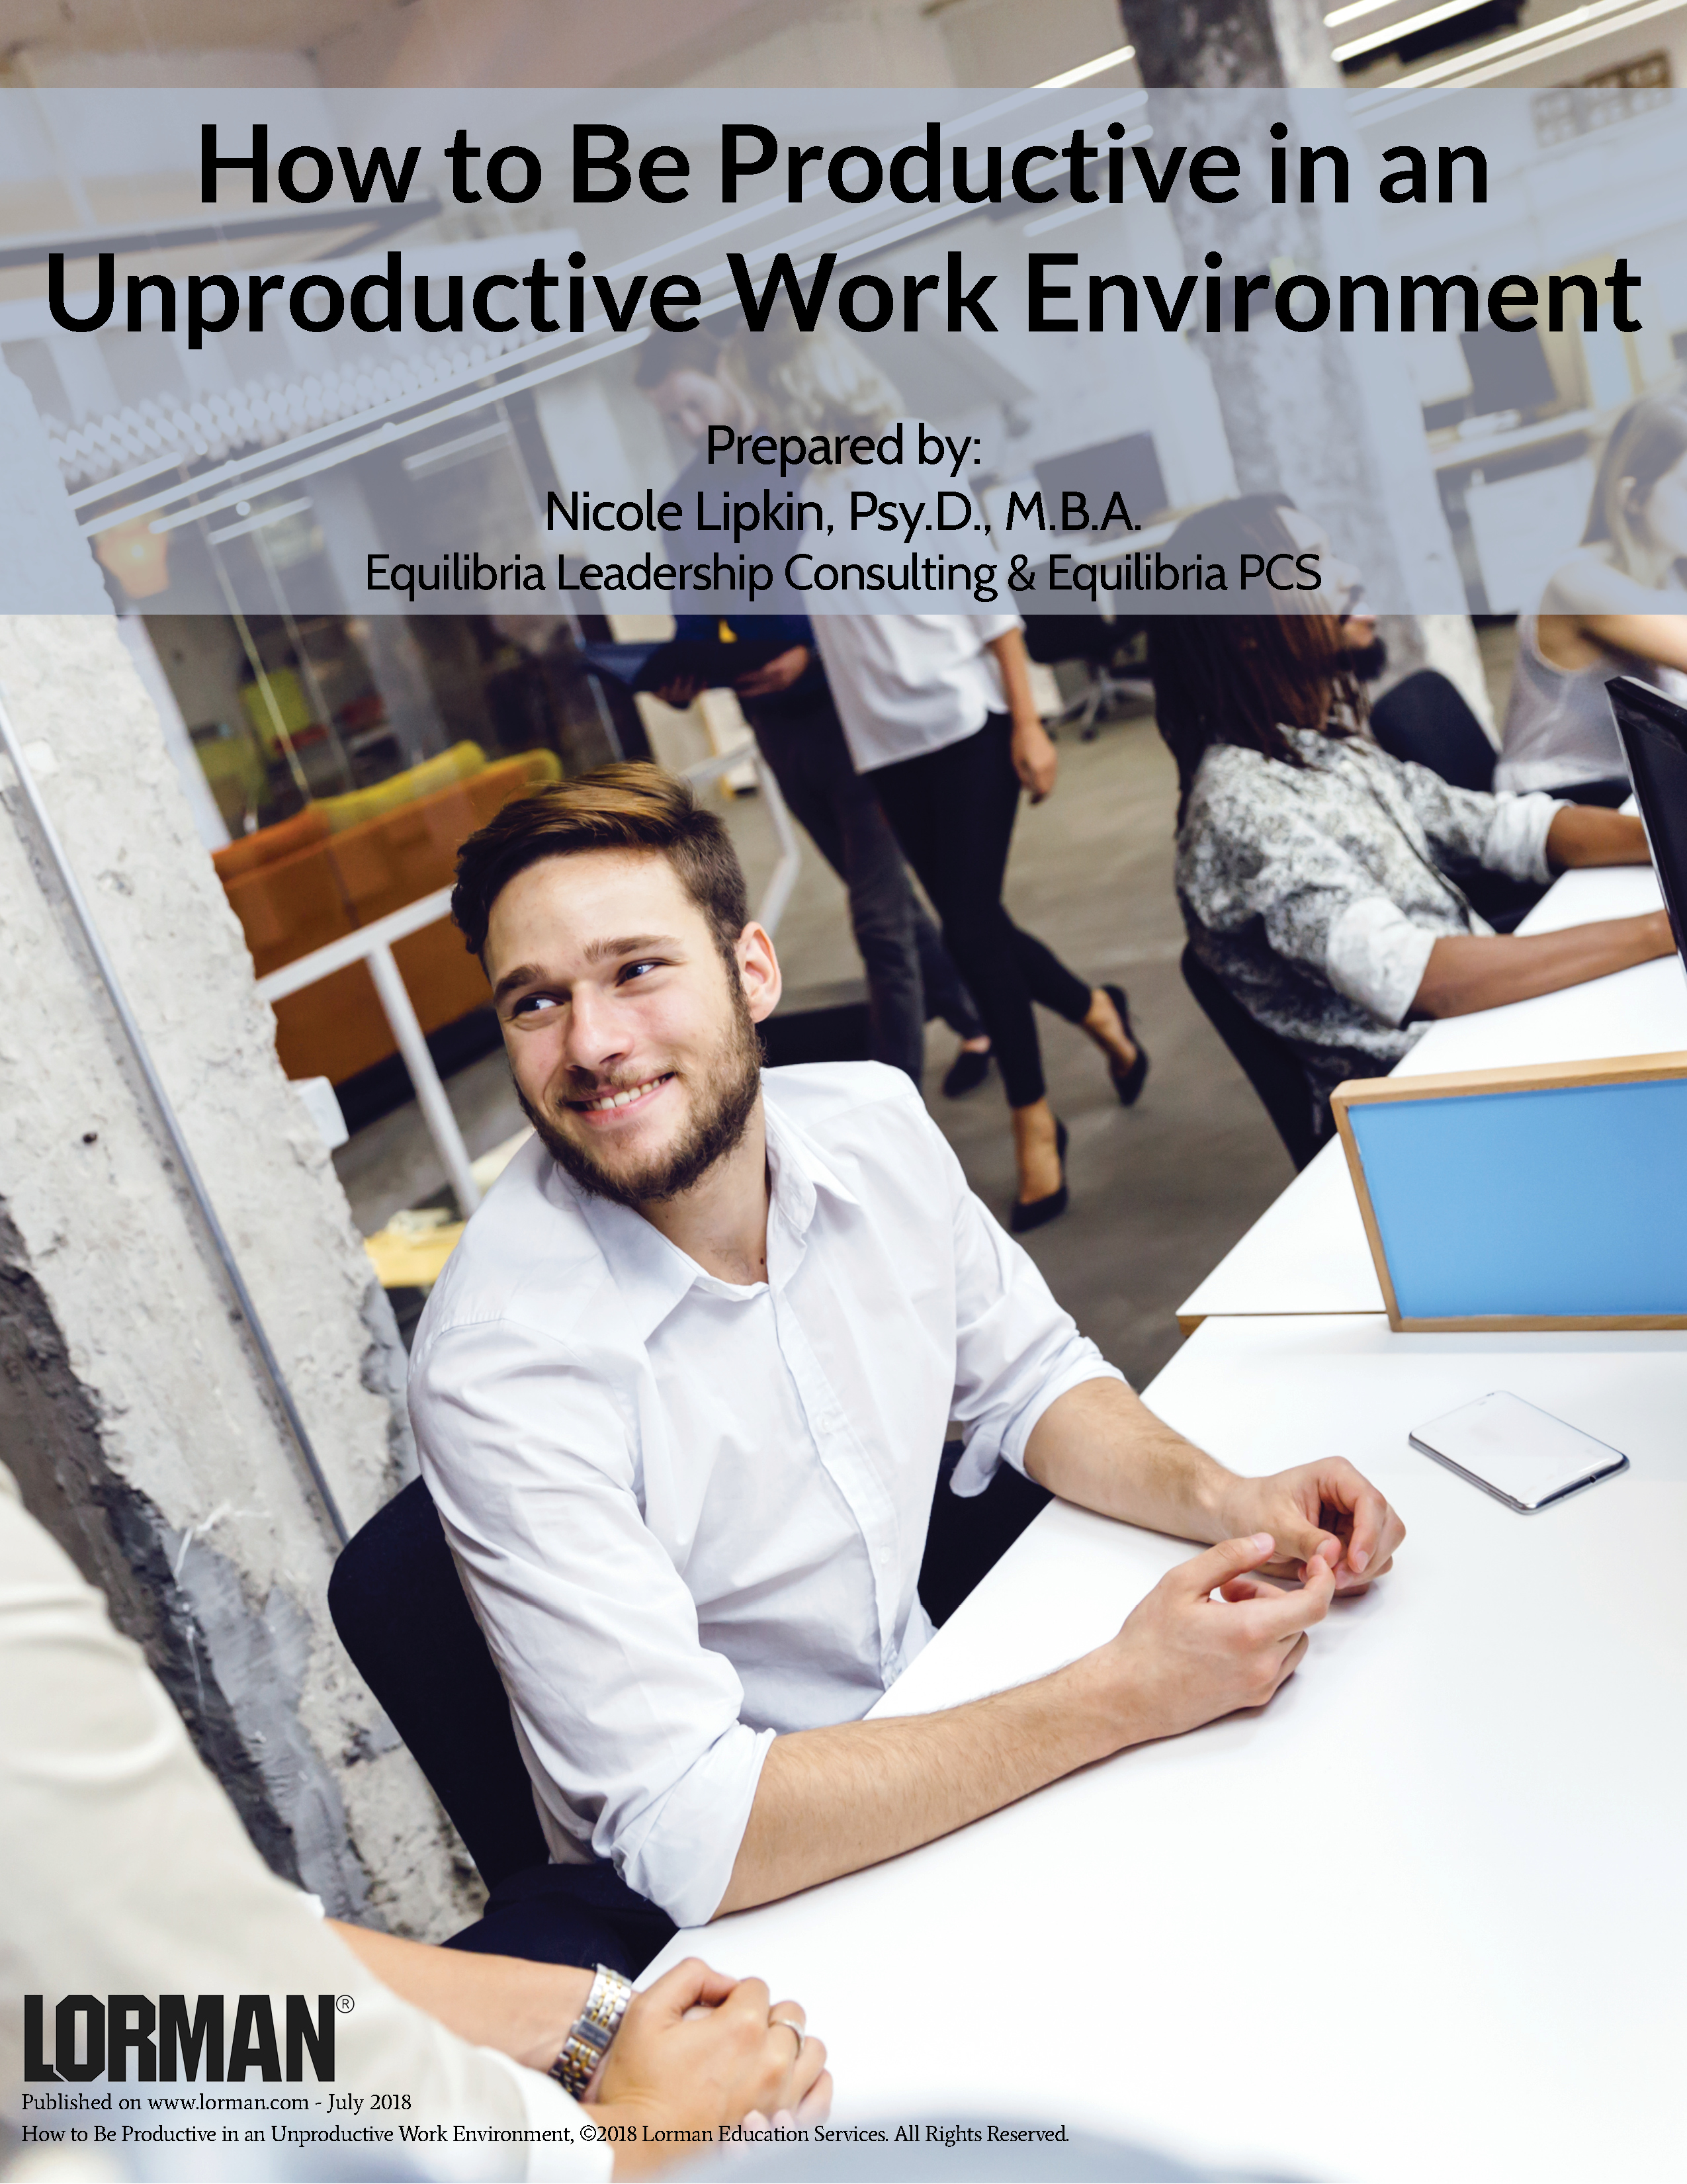 How to Be Productive in an Unproductive Work Environment